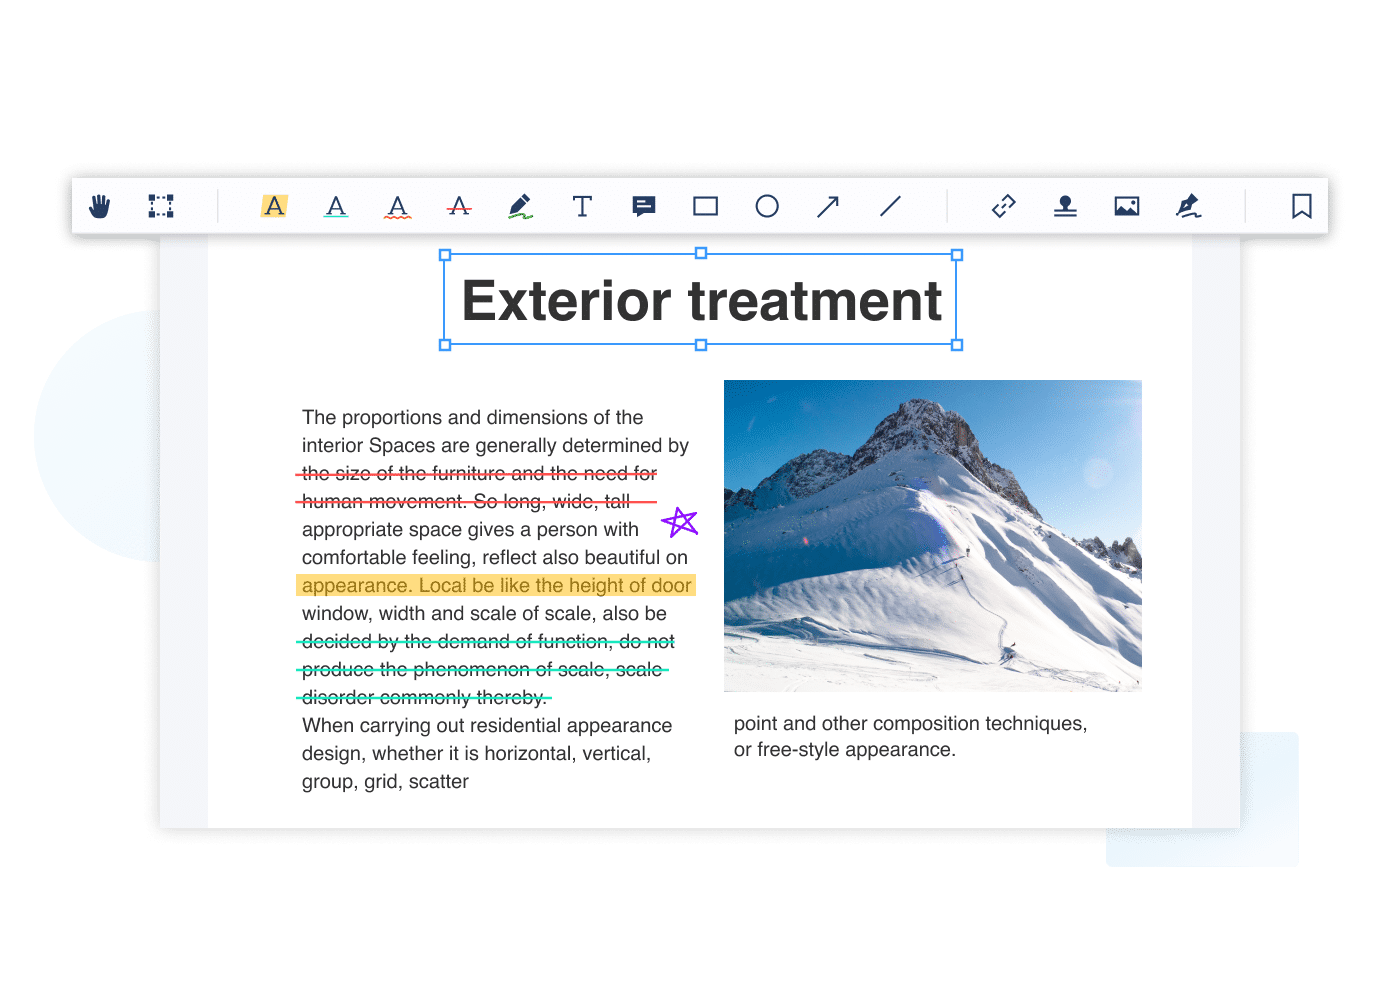 Best PDF annotation tool to annotate PDFs in Windows 10